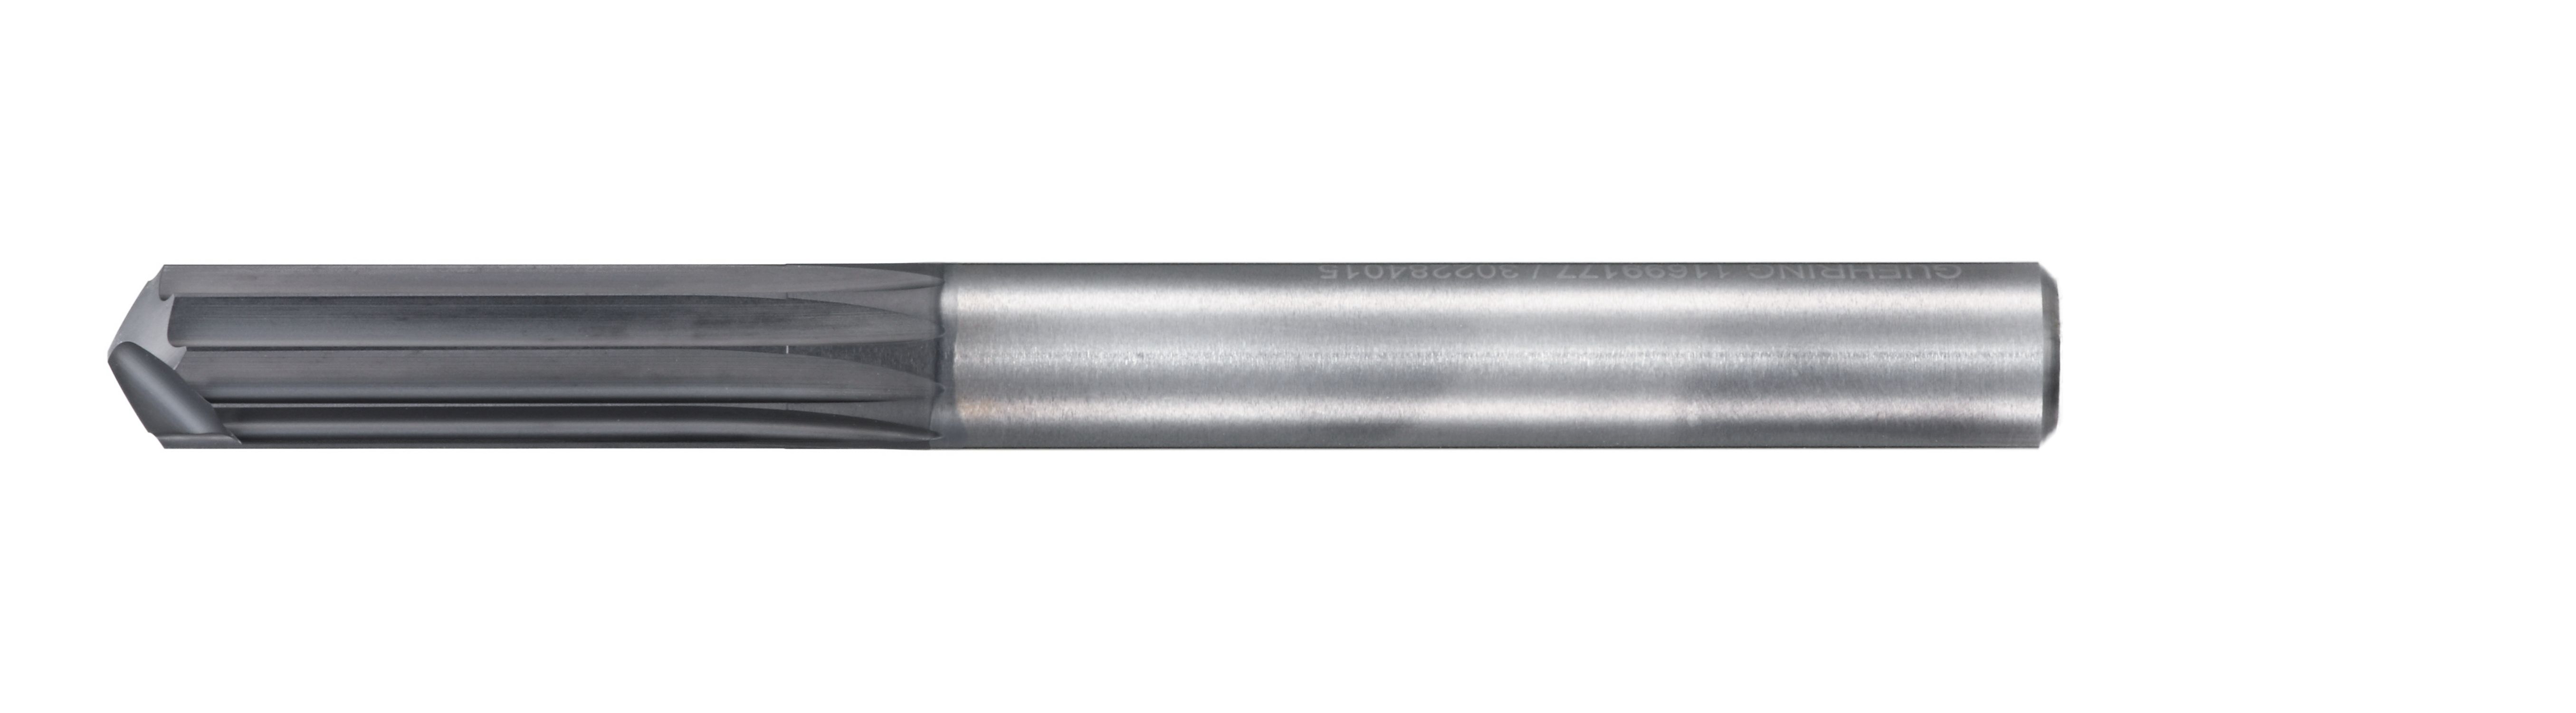 Grooving/Shouldering Multi-Flute End Mill for CFRP with Drill Point CR100 6720 6720-008.000